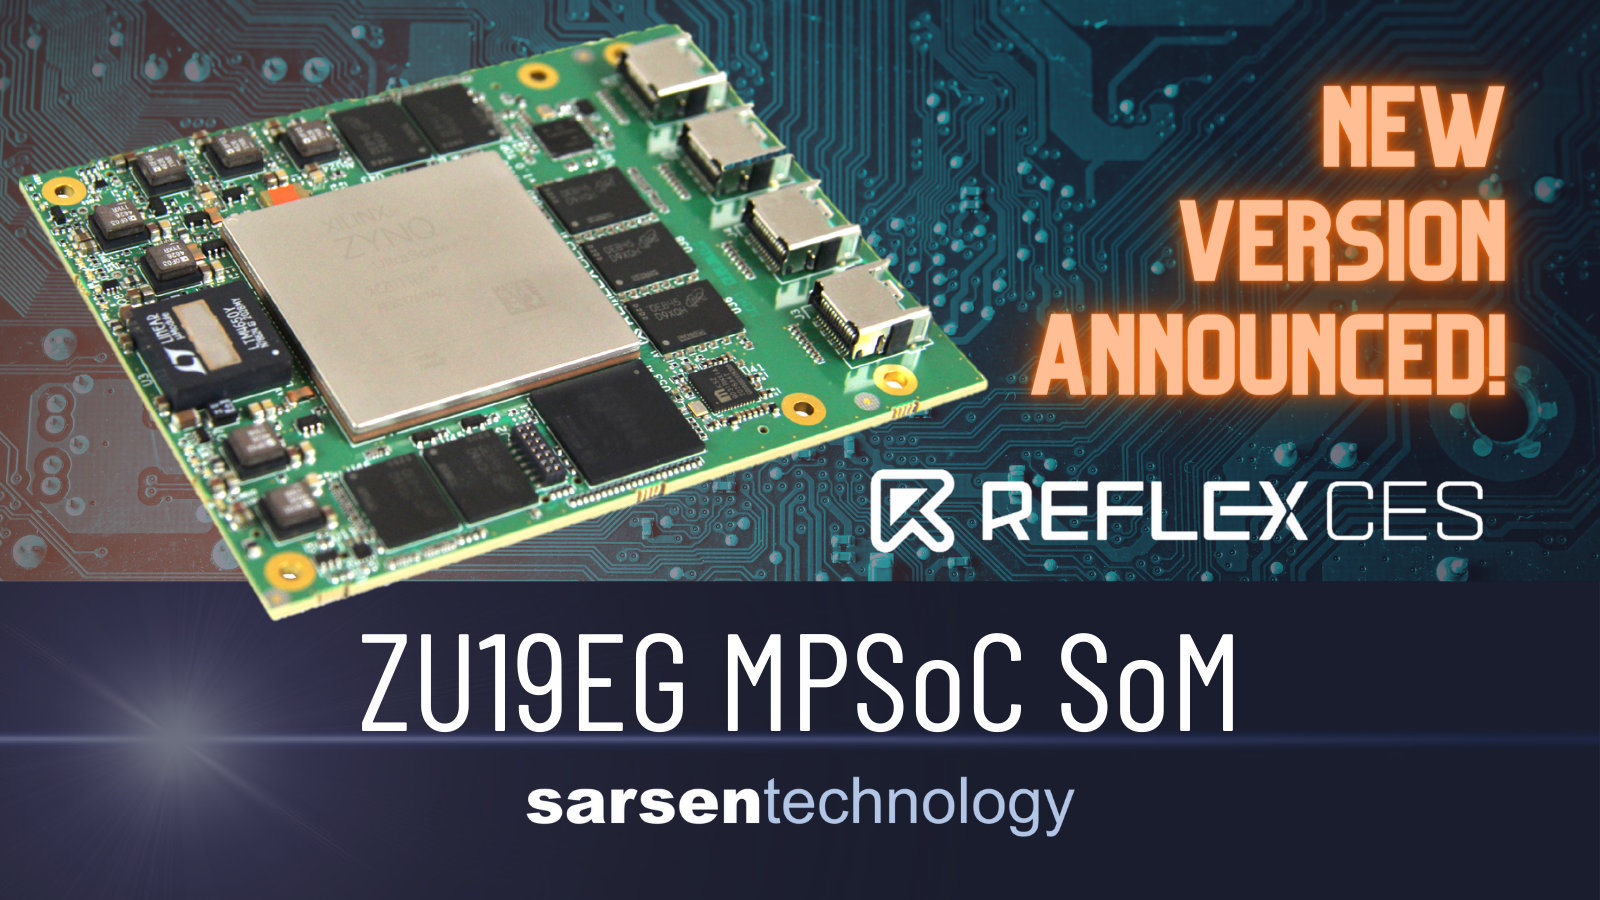 Zeus SoC Now Features ZU19EG FPGA for Even More Processing Power